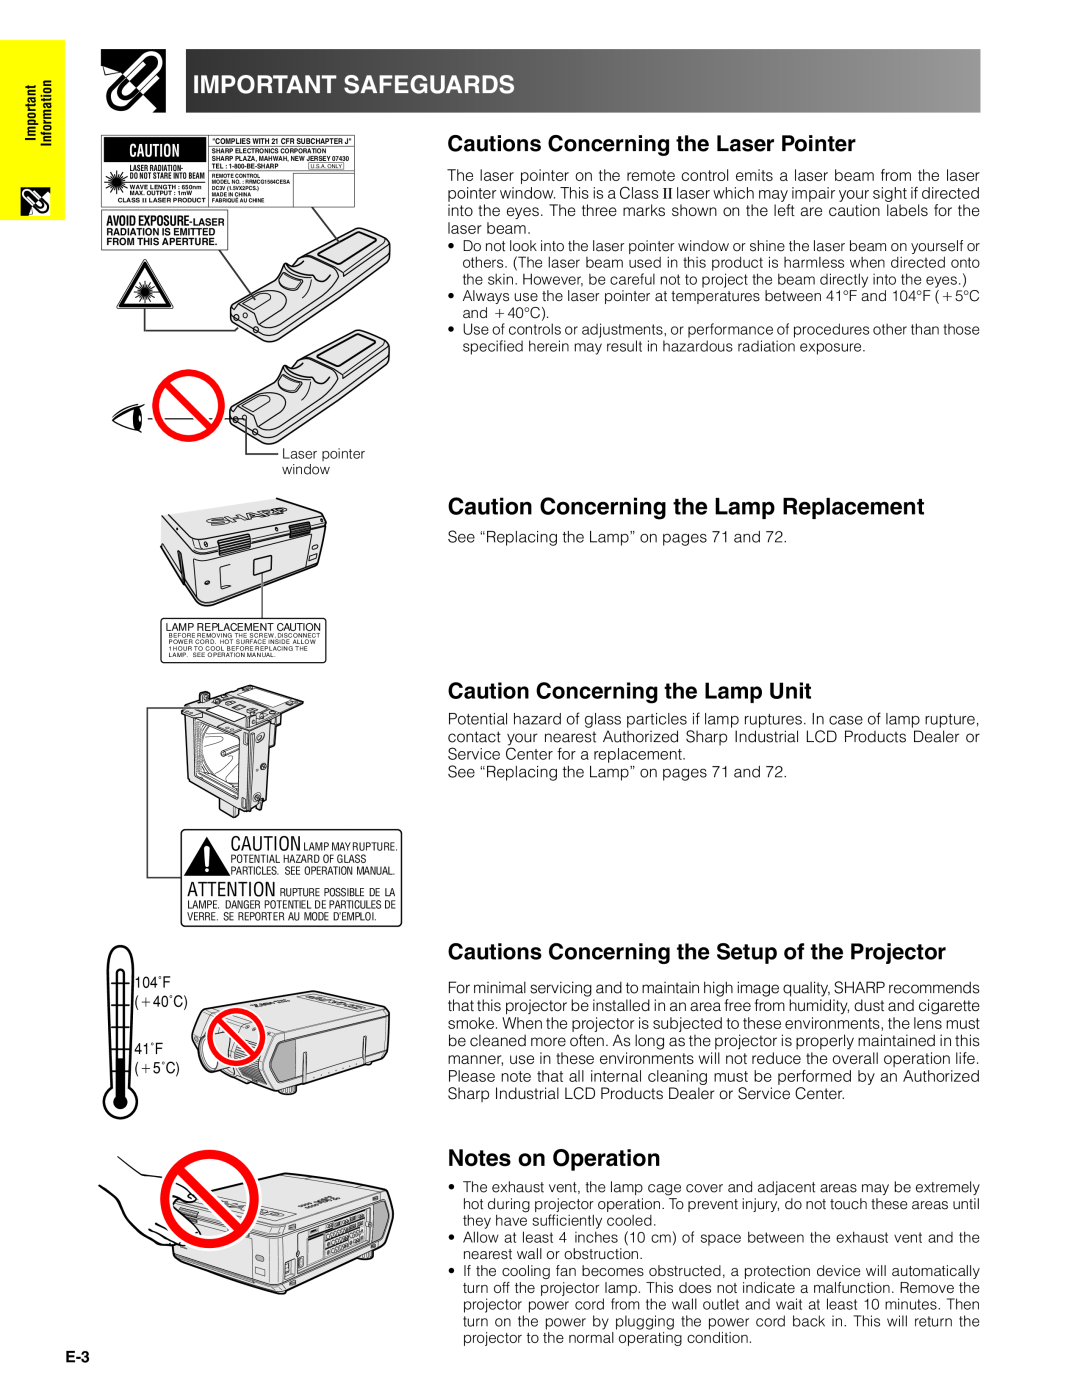 Sharp XG-V10XU Important Safeguards, Cautions Concerning the Laser Pointer, Caution Concerning the Lamp Replacement 